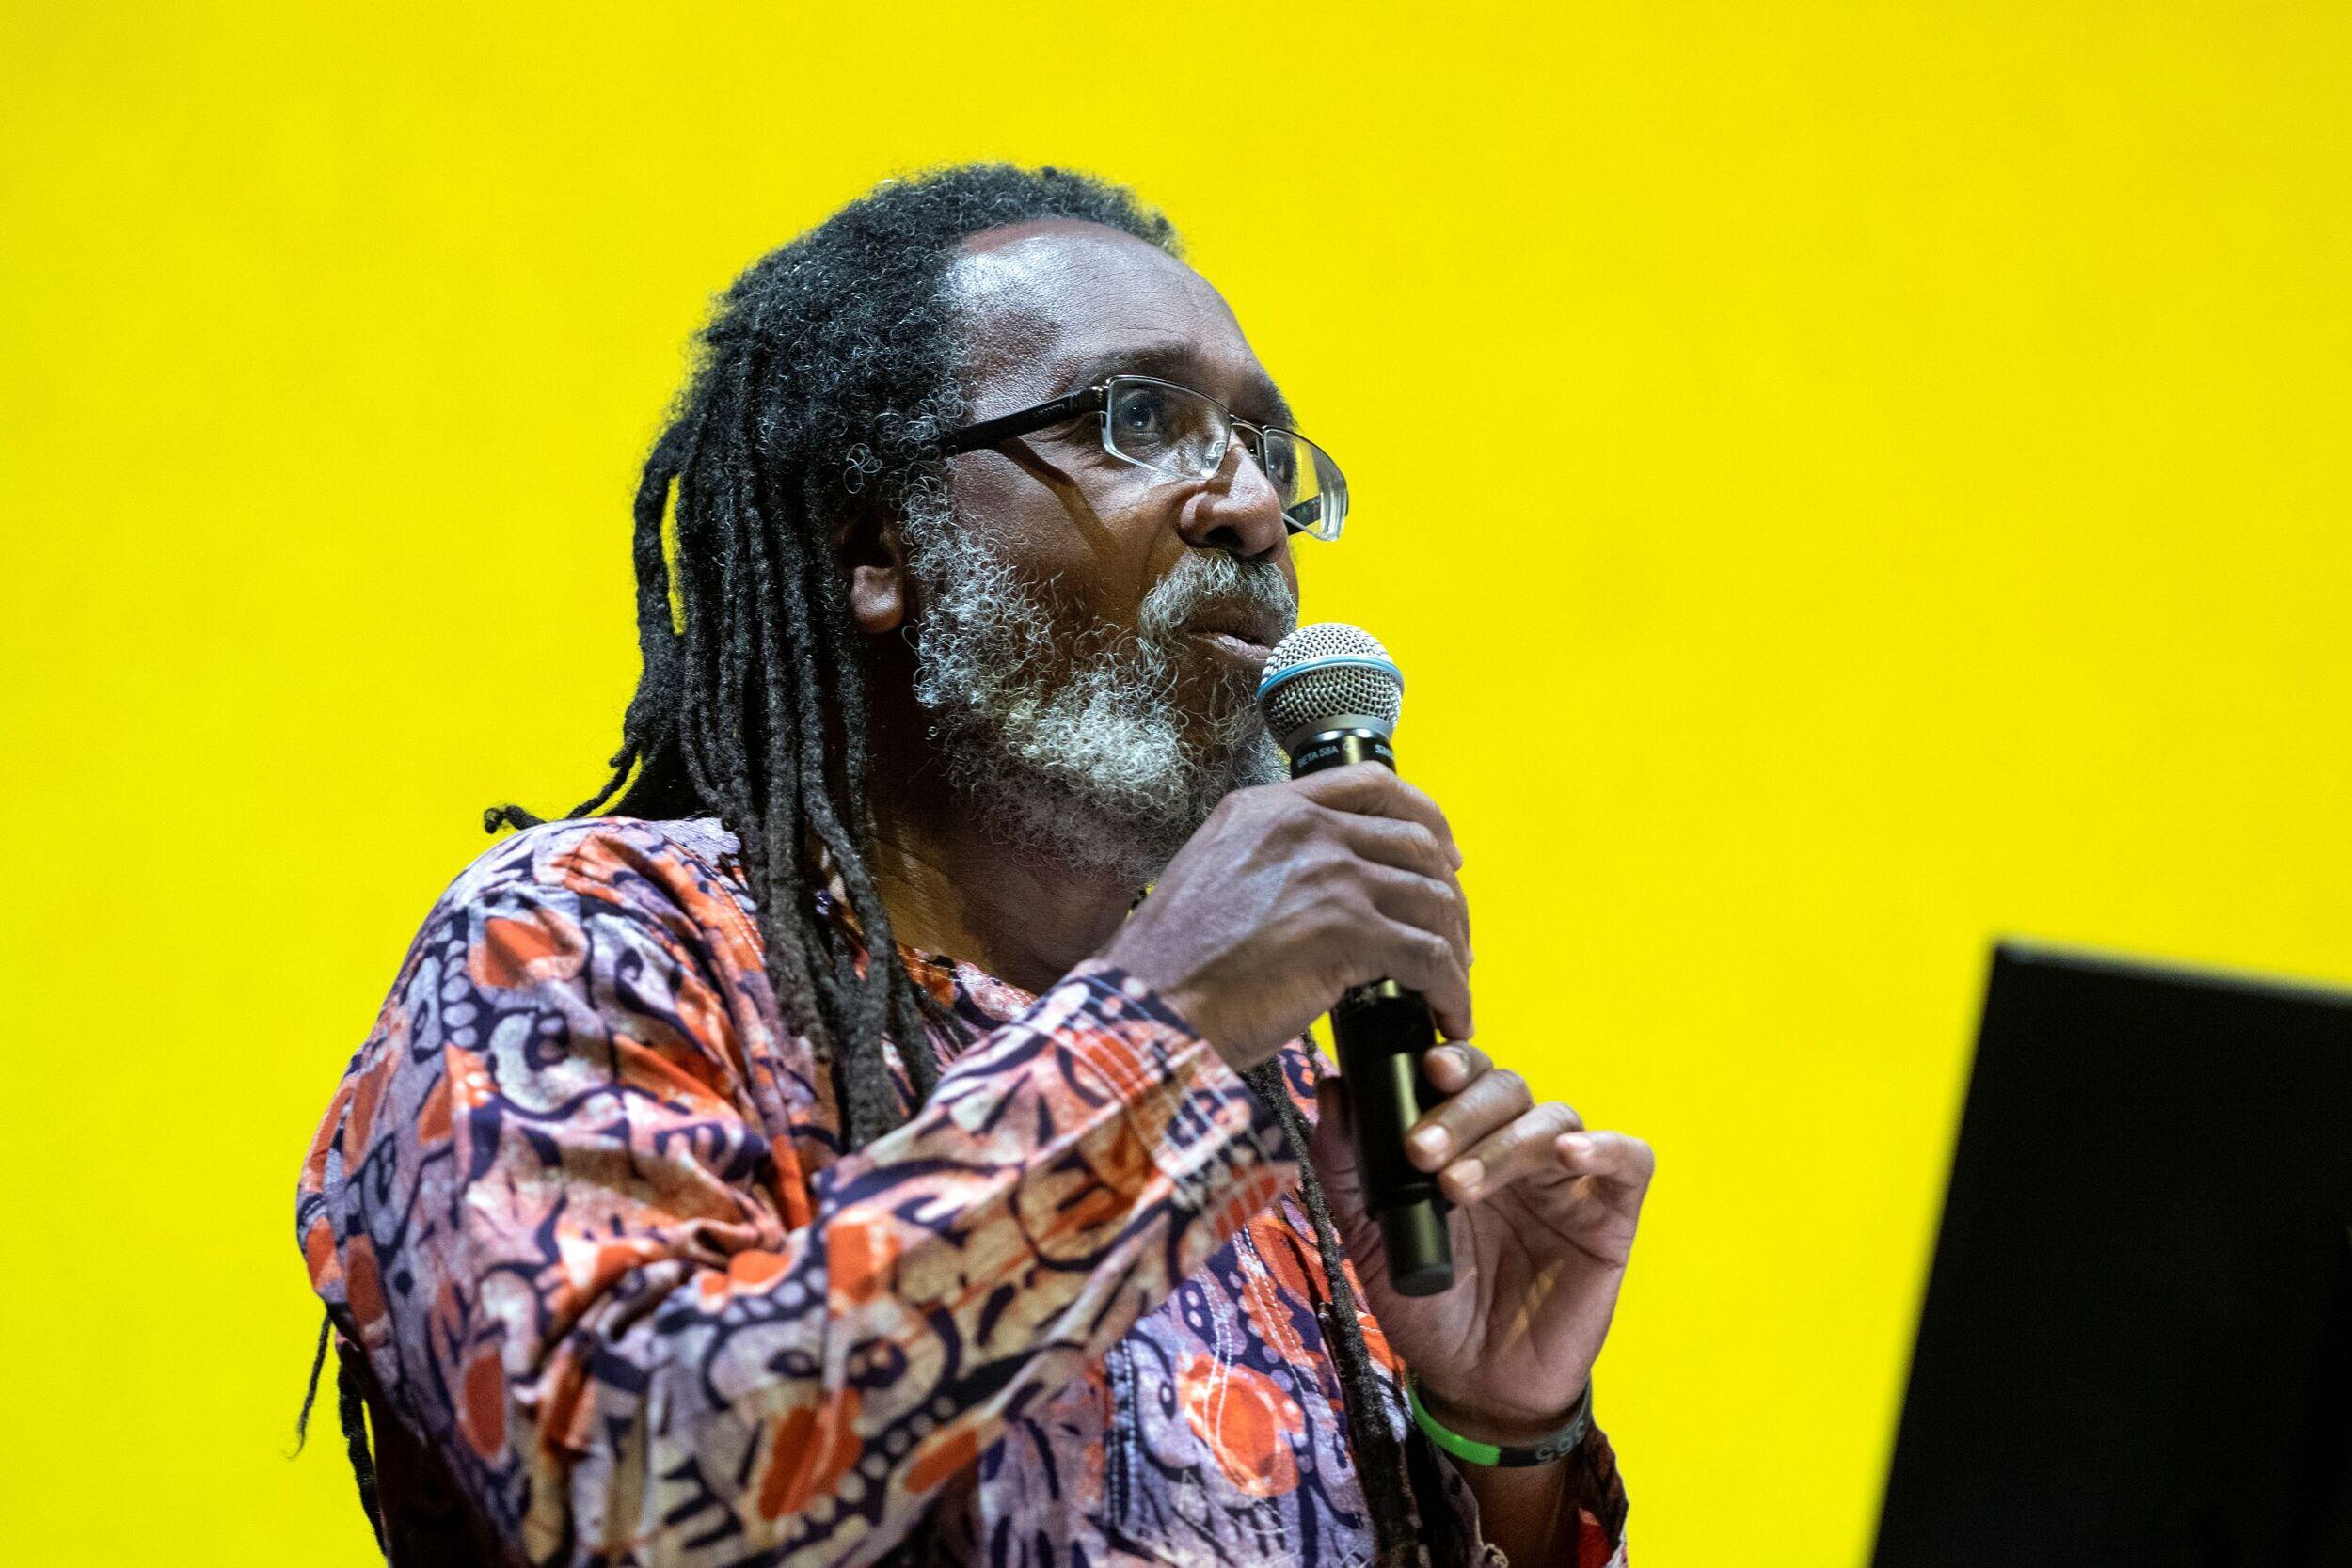 A man with long dreads speaking into a microphone in front of a yellow background. 